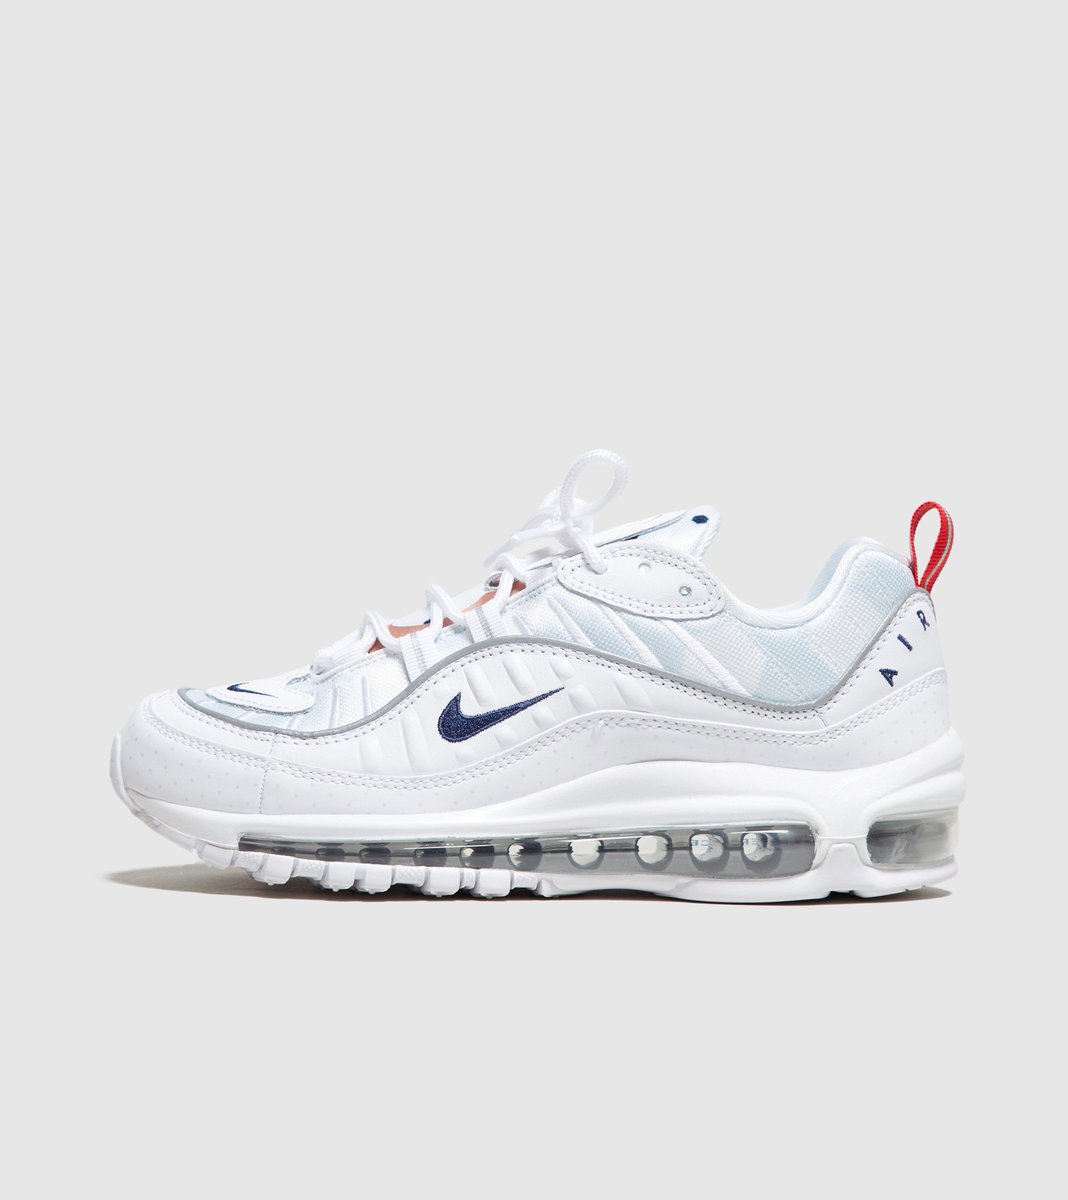 beest gouden Krachtig size? on Twitter: "The @Nike Air Max 98 Premium 'Unité Totale'. Available  online and in selected size? stores - #sizeHQ Shop now:  https://t.co/mk0AIRCCfi https://t.co/shTvbI7kGy" / Twitter